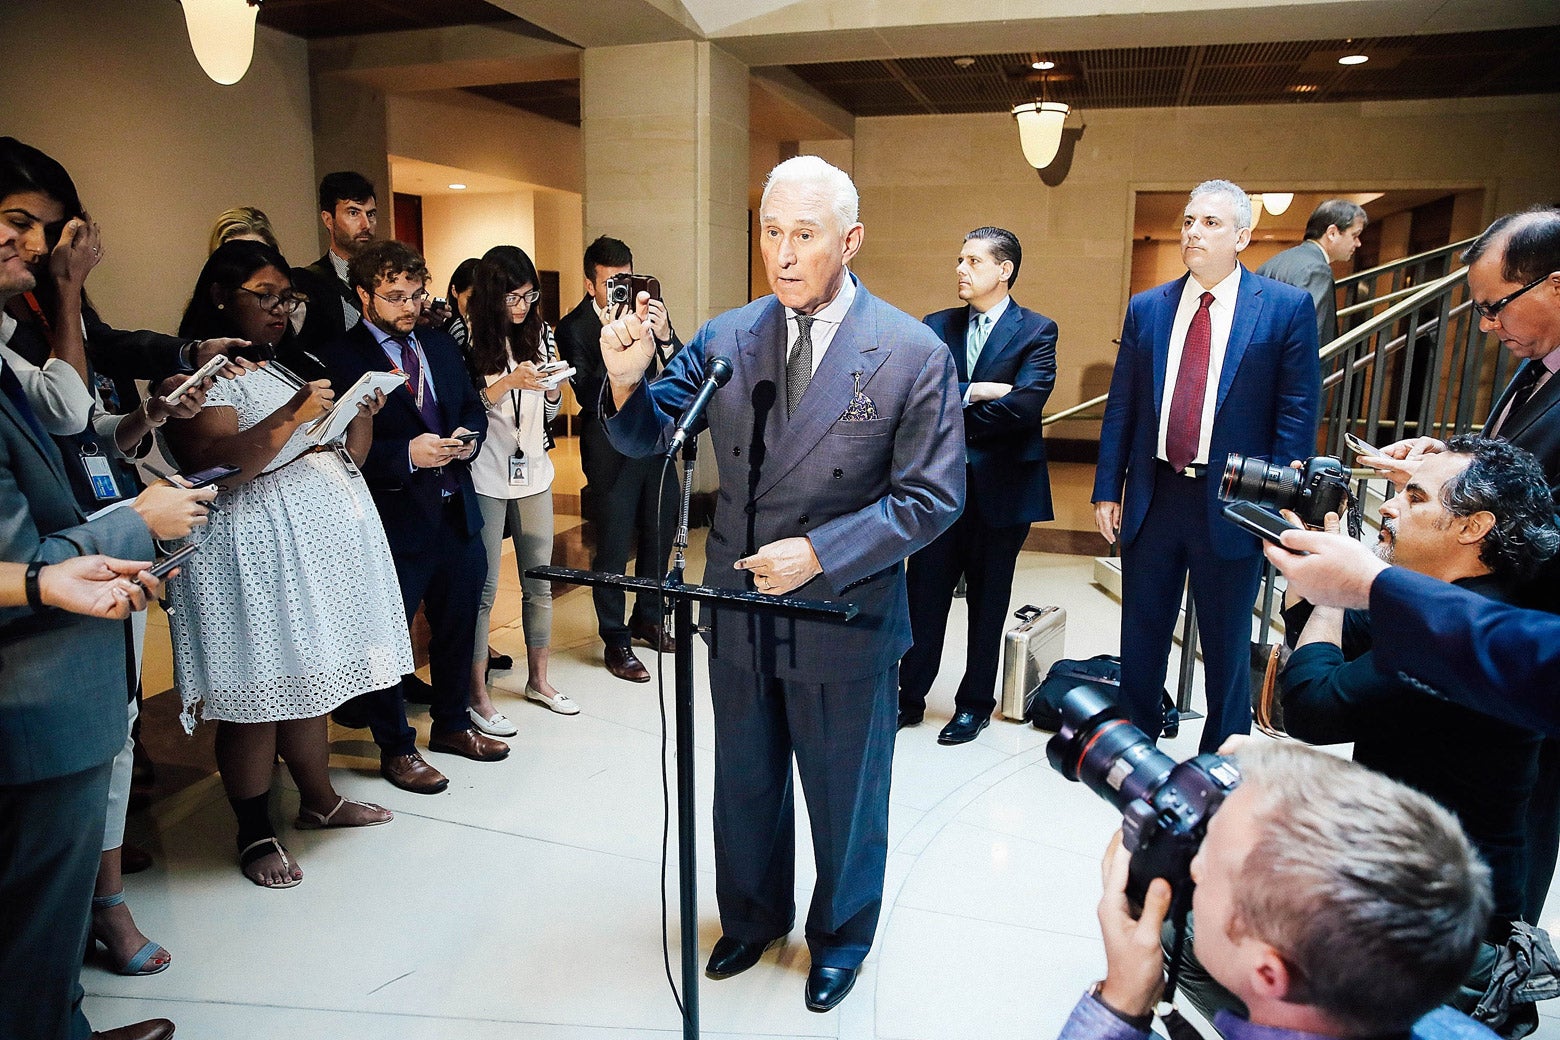 Roger Stone, former confidant to President Trump, speaks to the media after appearing before the House Intelligence Committee during a closed hearing on Sept. 26, 2017.